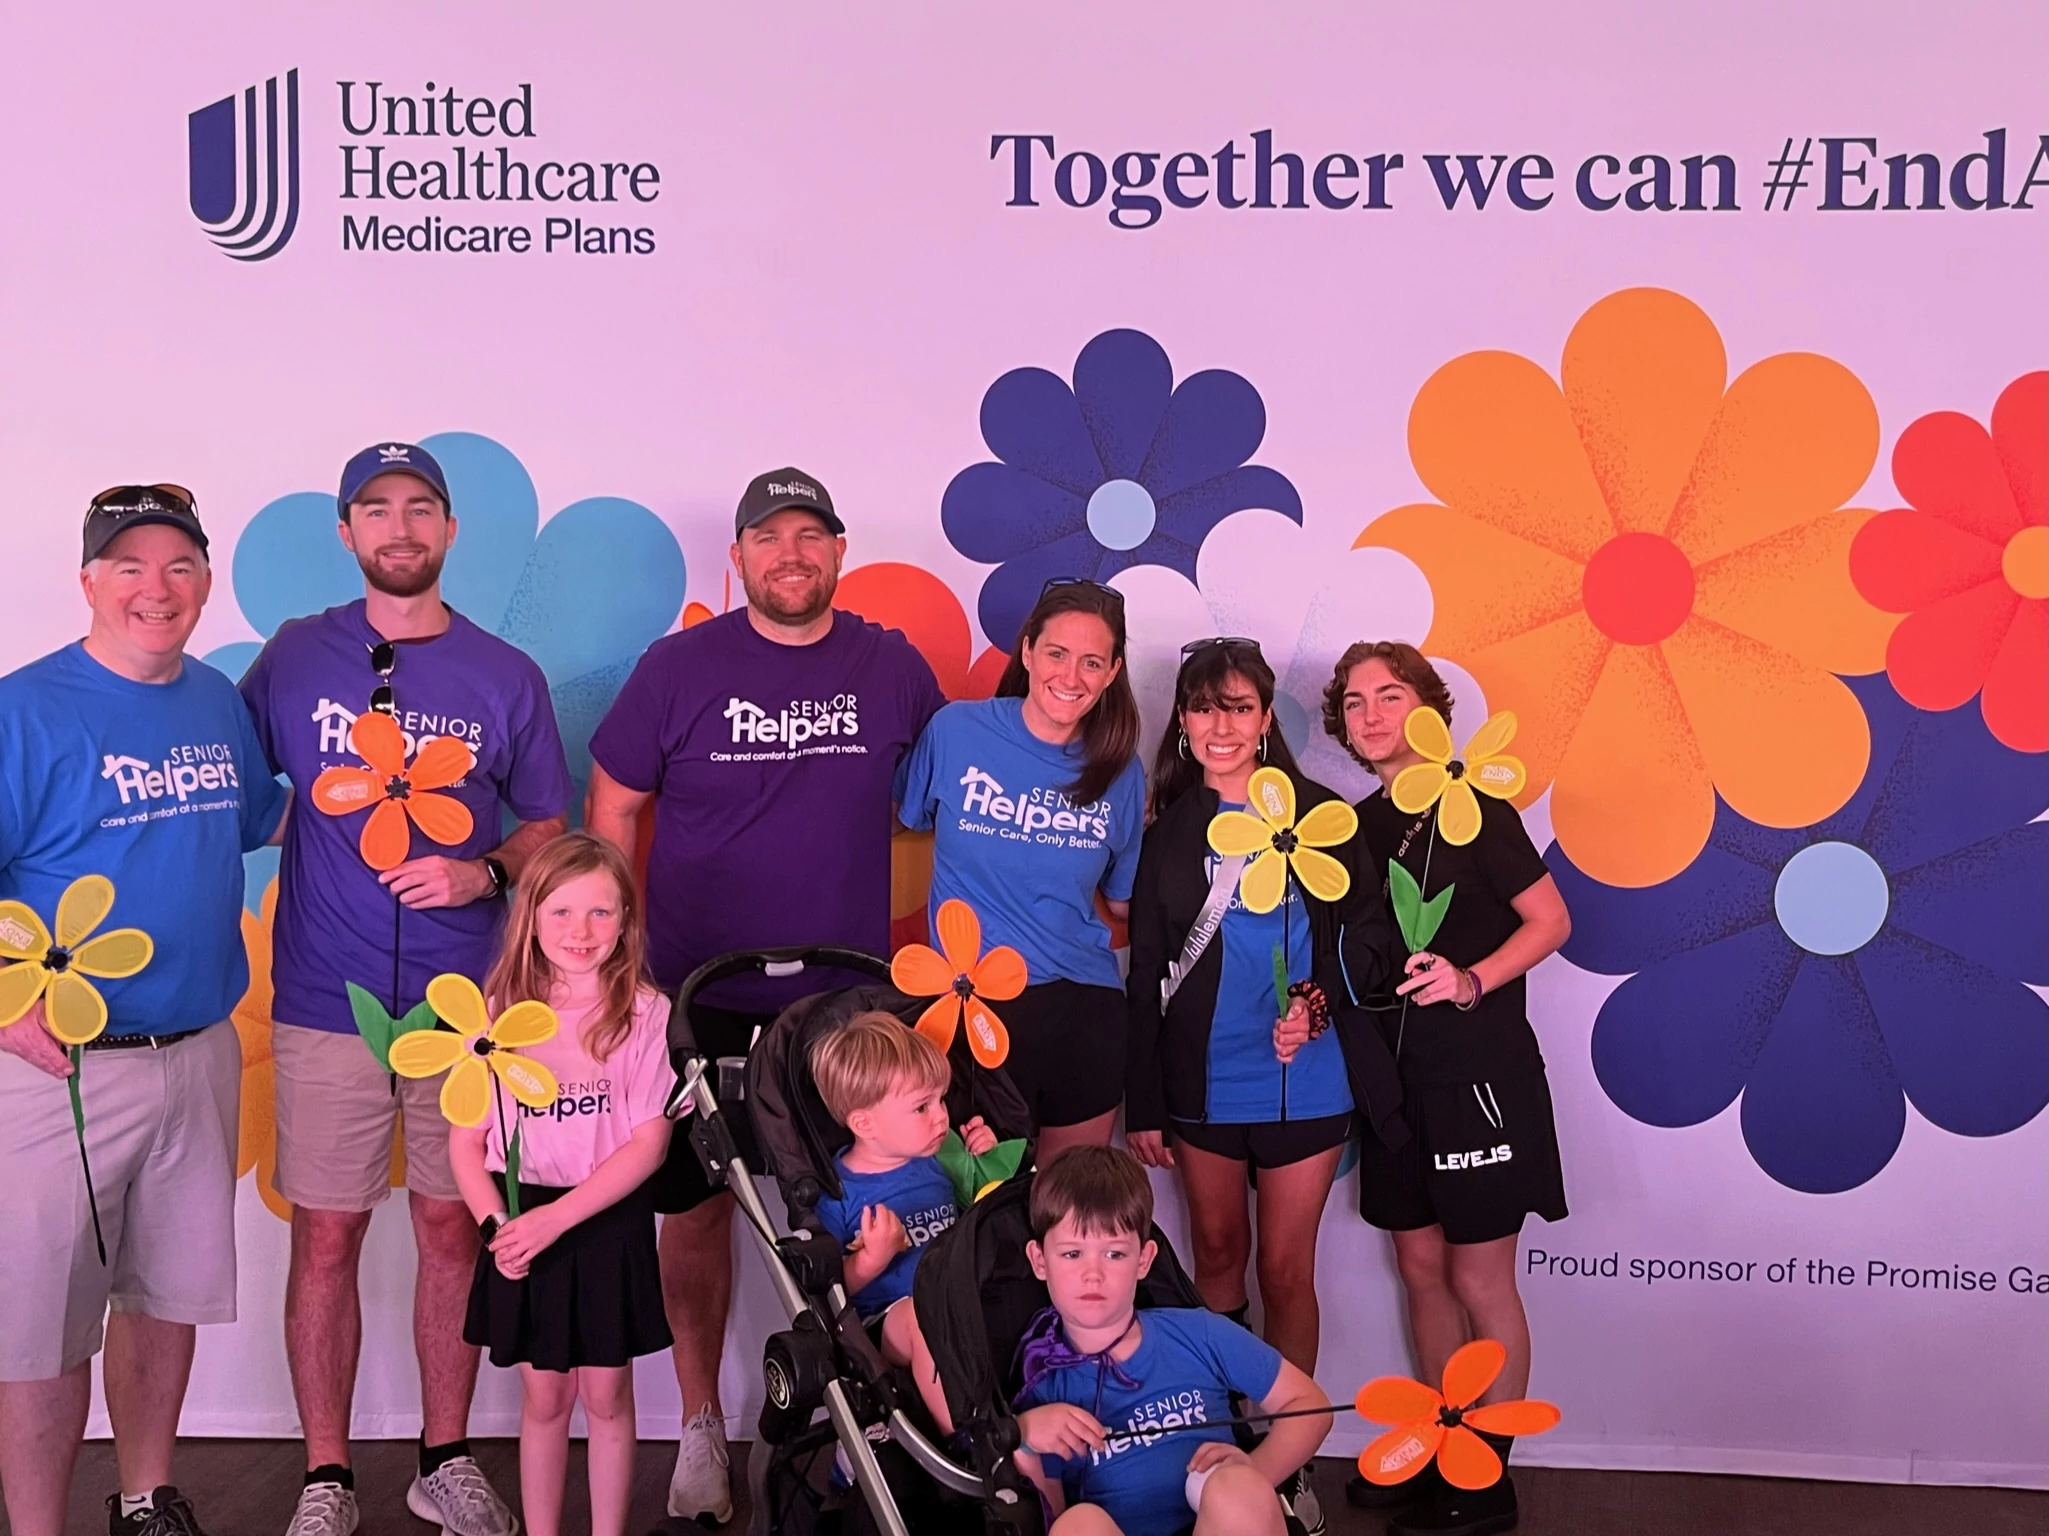 Senior Helpers of Lake Minnetonka and Senior Helpers of Stillwater joined forces at the Walk to End Alzheimer's for the Twin Cities Chapter at Target Field! We had an amazing time walking for a great cause.